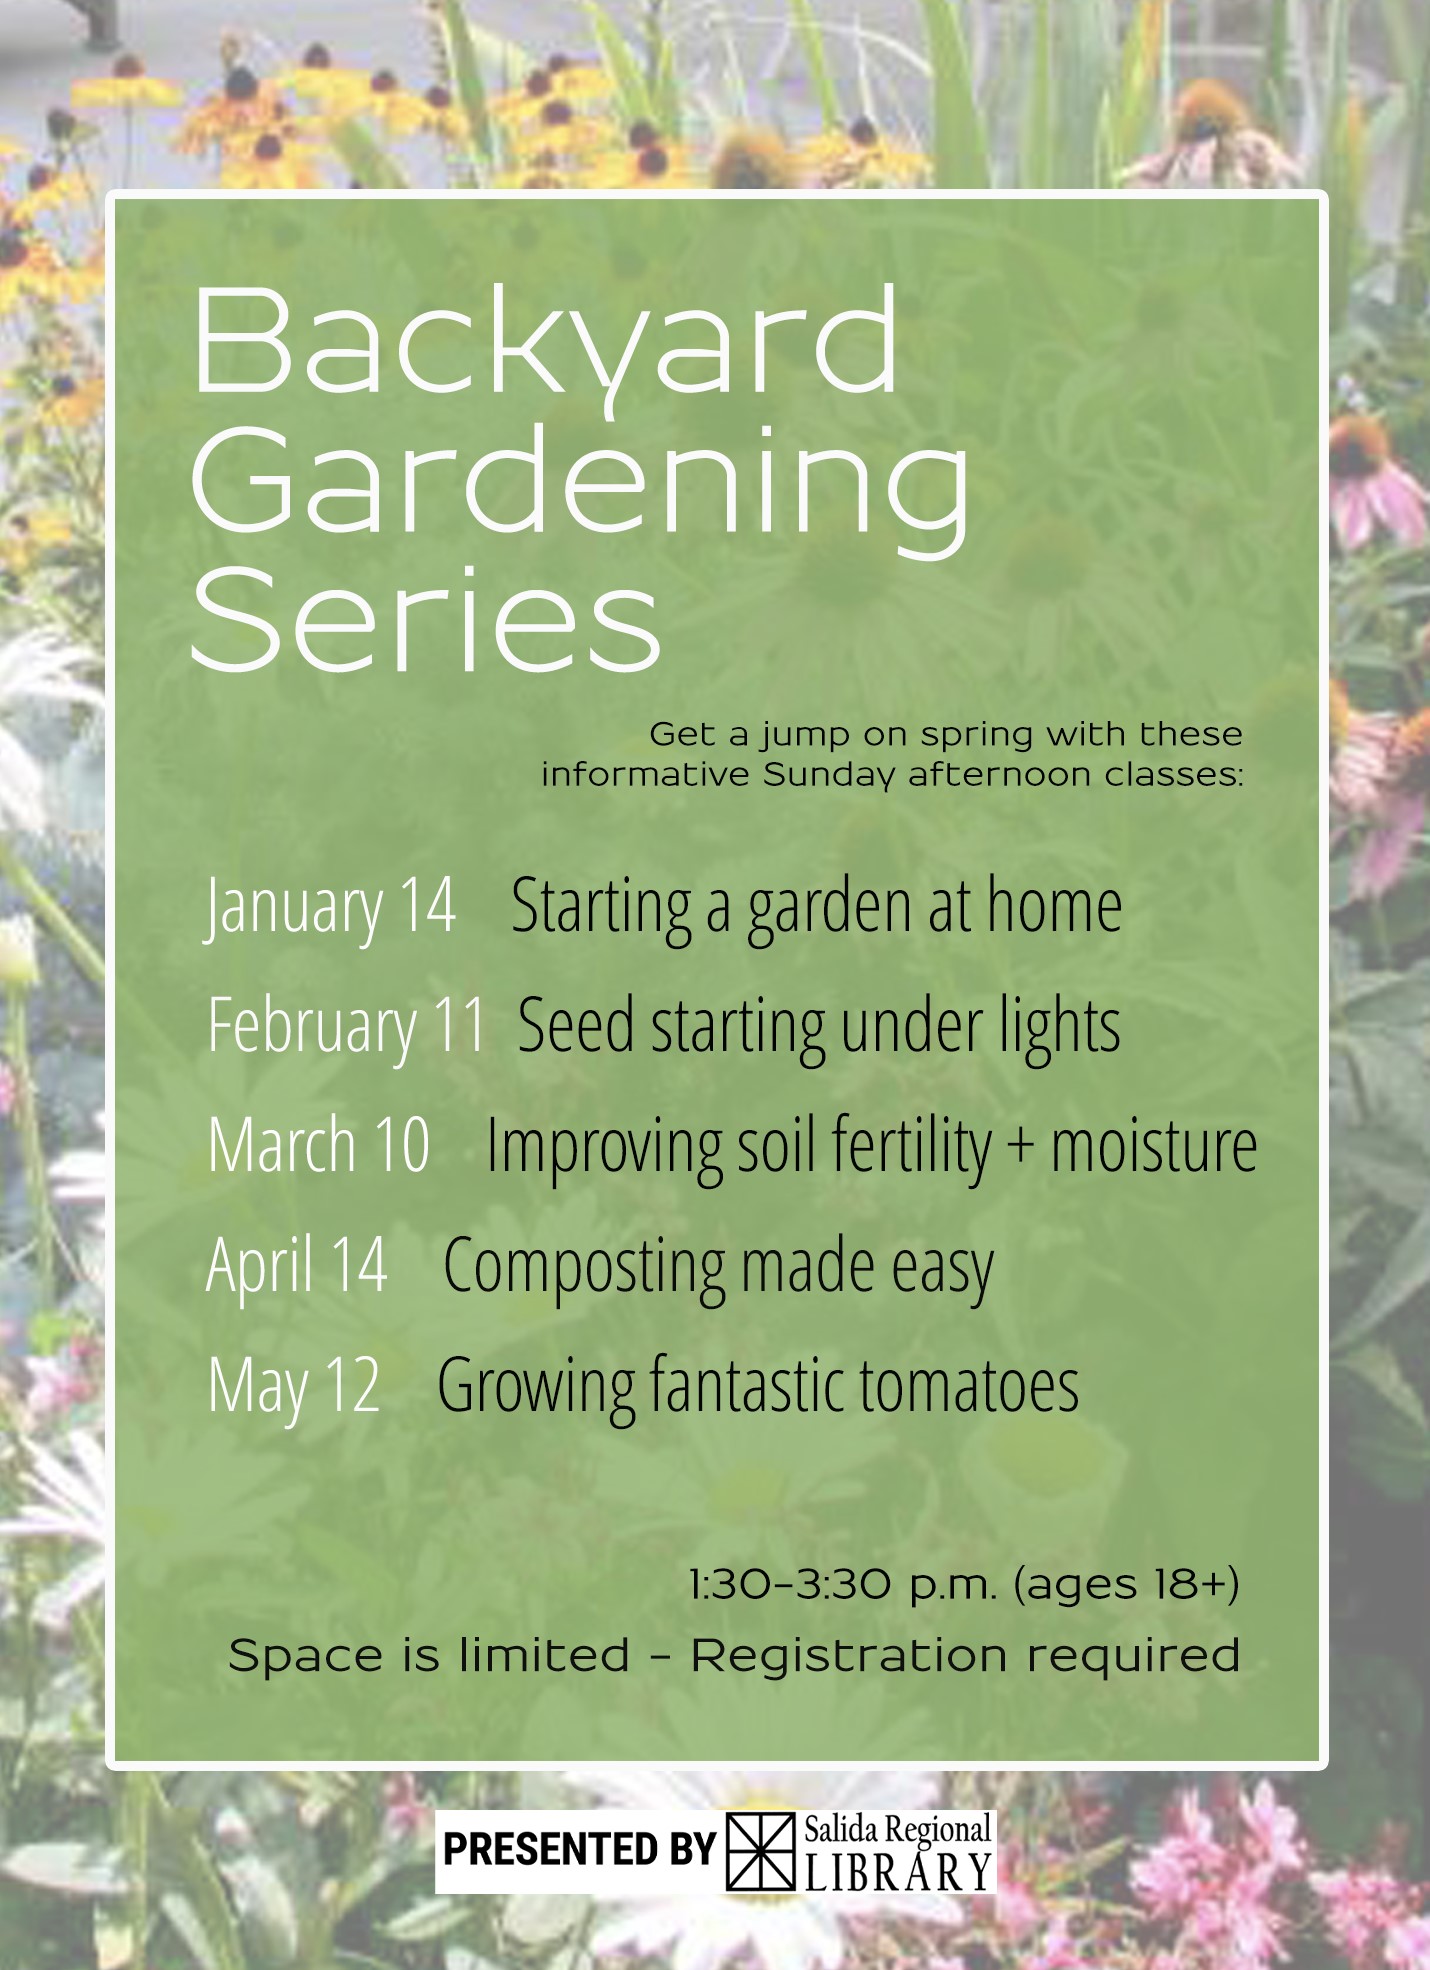 Backyard Gardening Series Get a Jump on spring with these informative Sunday afternoon classes. January 14 Starting a Garden at home. February 11 Seed Starting under lights. March 10 Improving Soil Fertility and moisture. April 14 composting made easy. May 12 Growing Fantastic Tomatoes. 1:30 to 3:30 (ages 18+) space is limited, Registration is required.